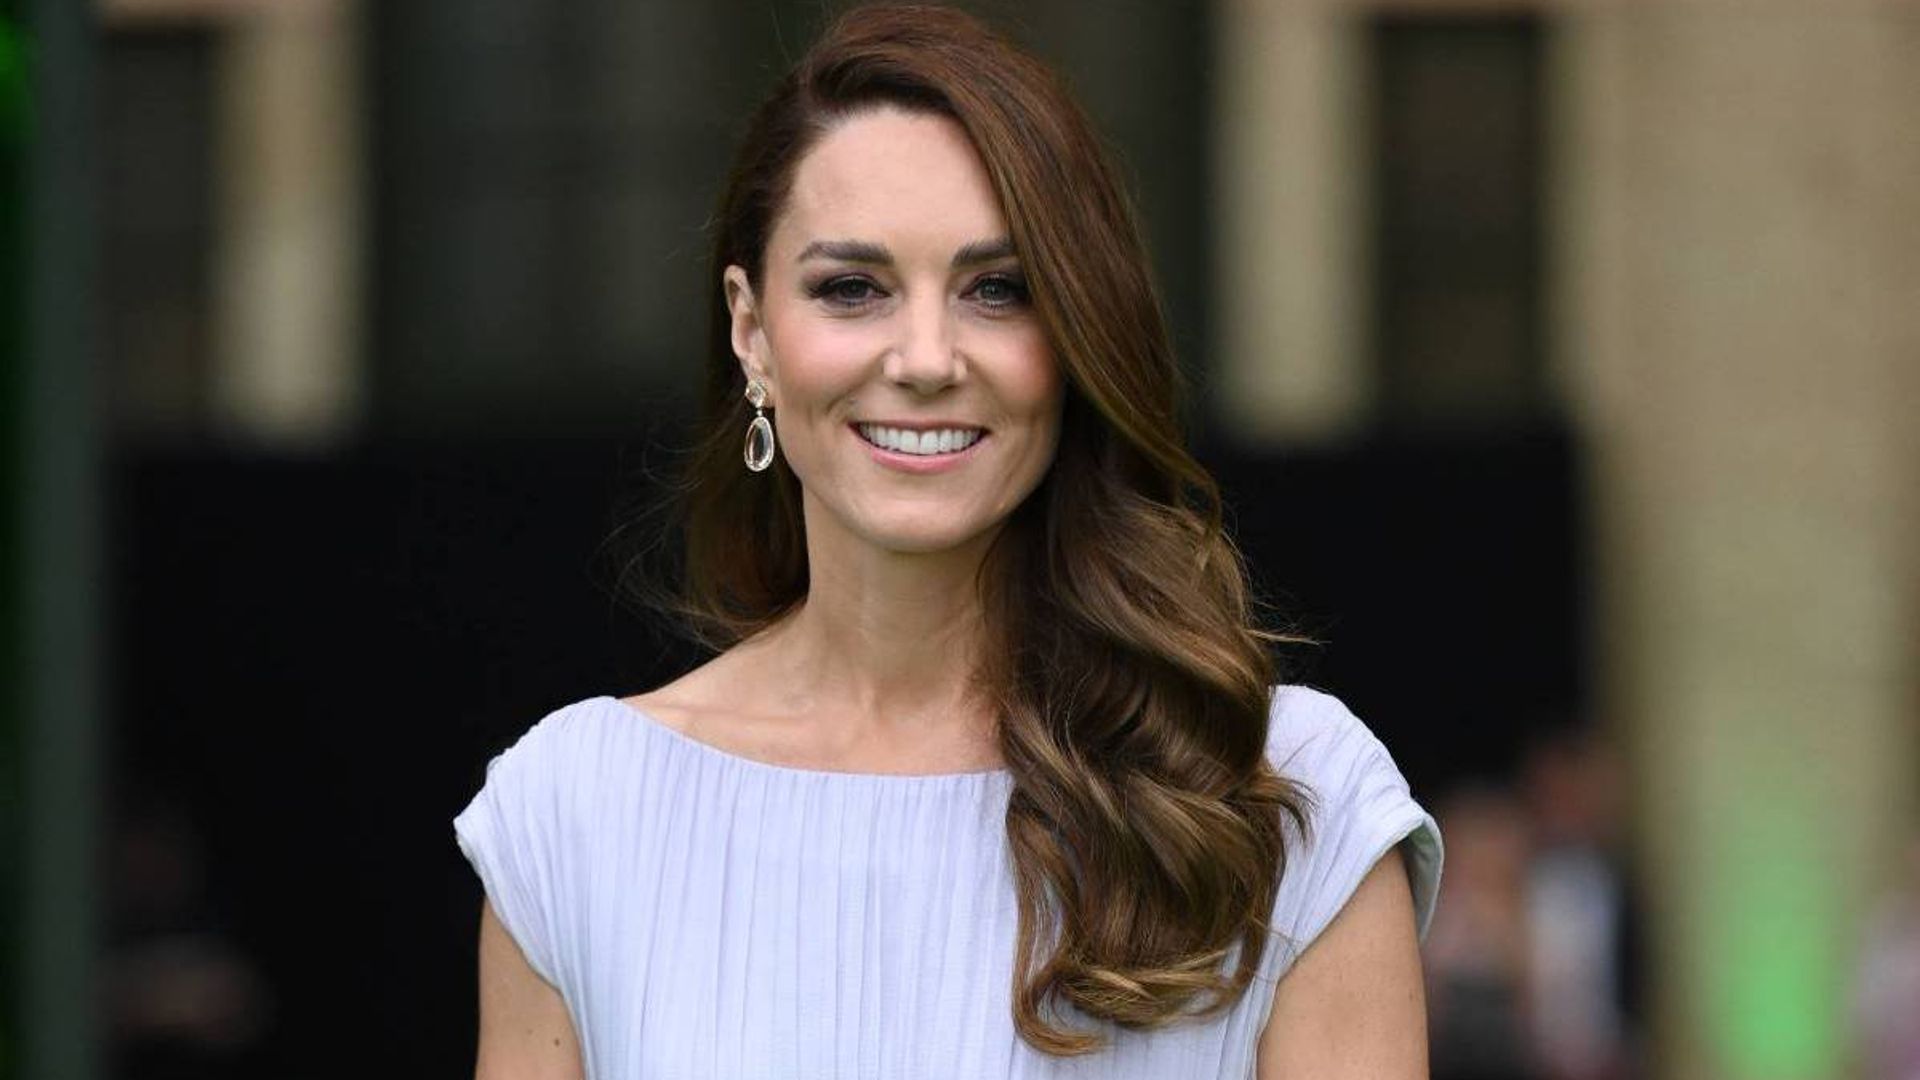 Kate Middleton sends rare personal message on her birthday